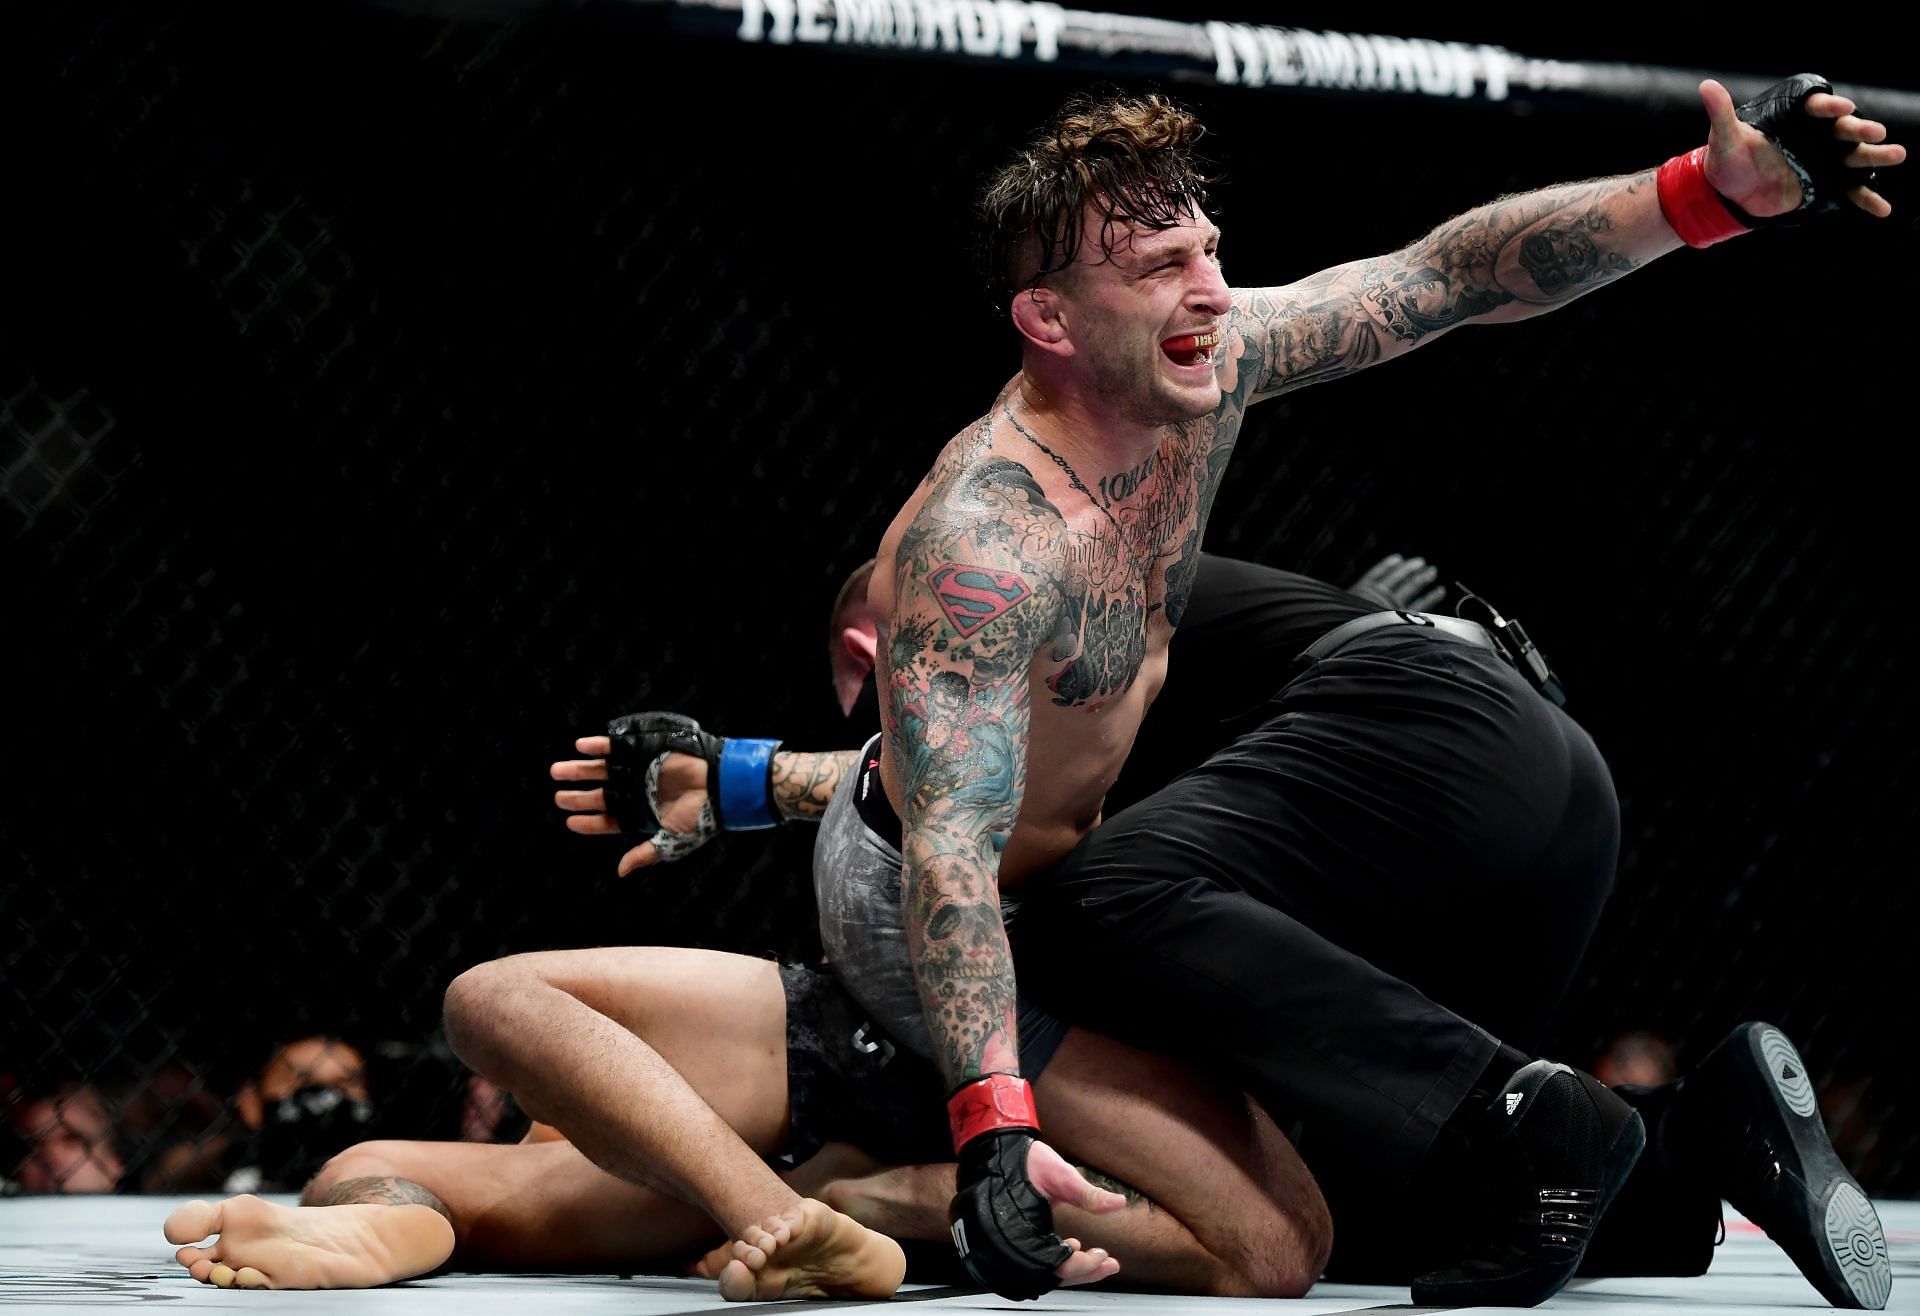 Gregor Gillespie prefers to fish than to talk trash on prospective opponents